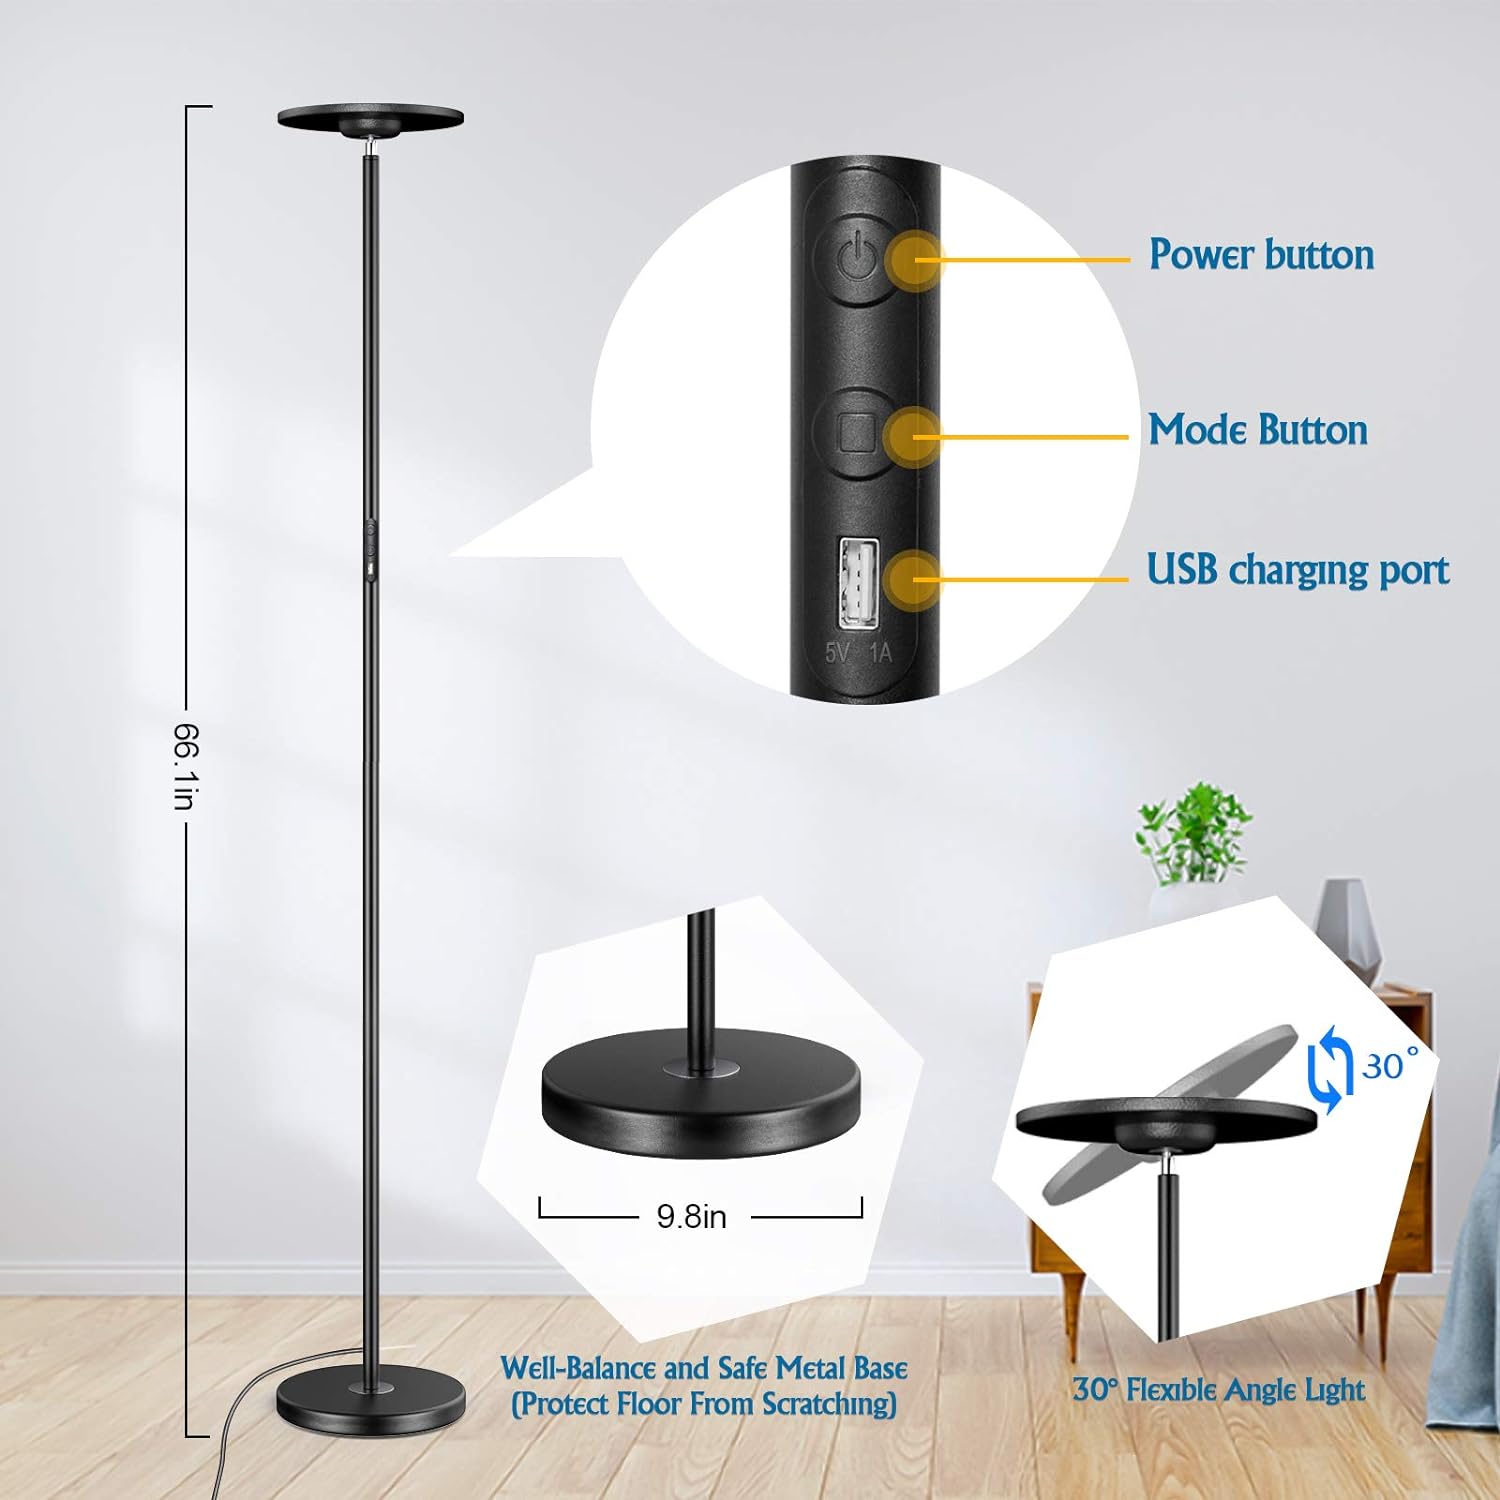 Brightever Dimmable Torchiere Floor, Torchiere Floor Lamp Dimmable